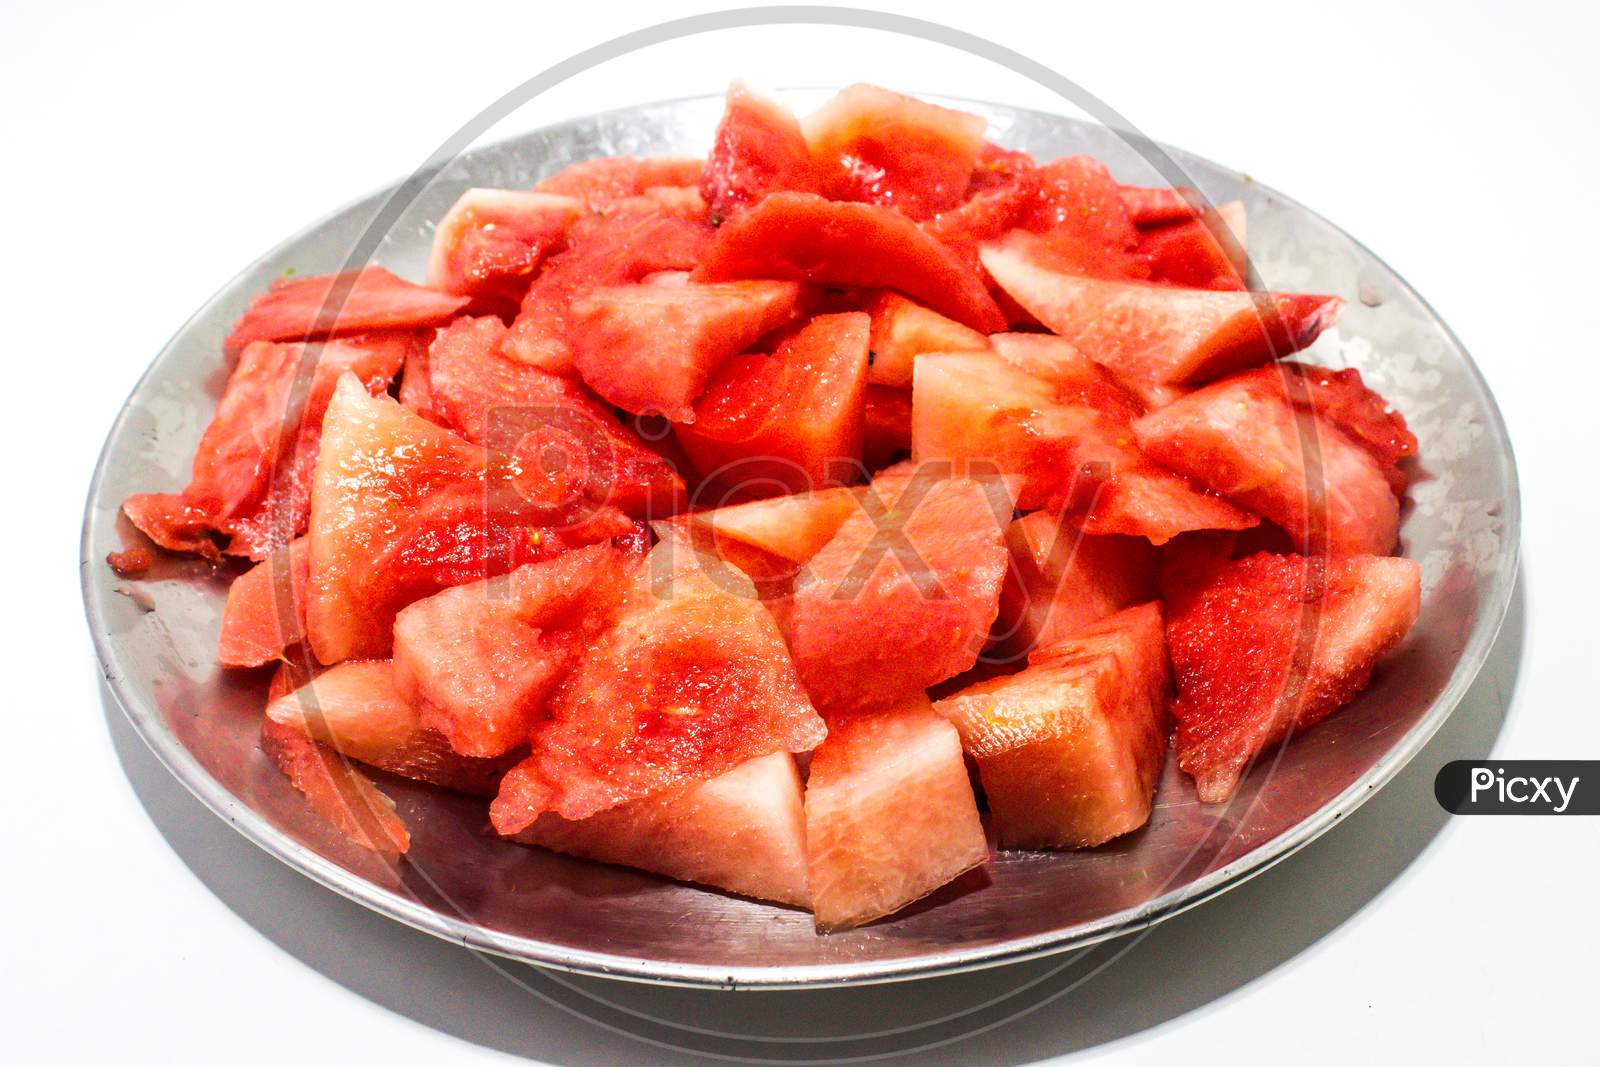 A picture of watermelon slices